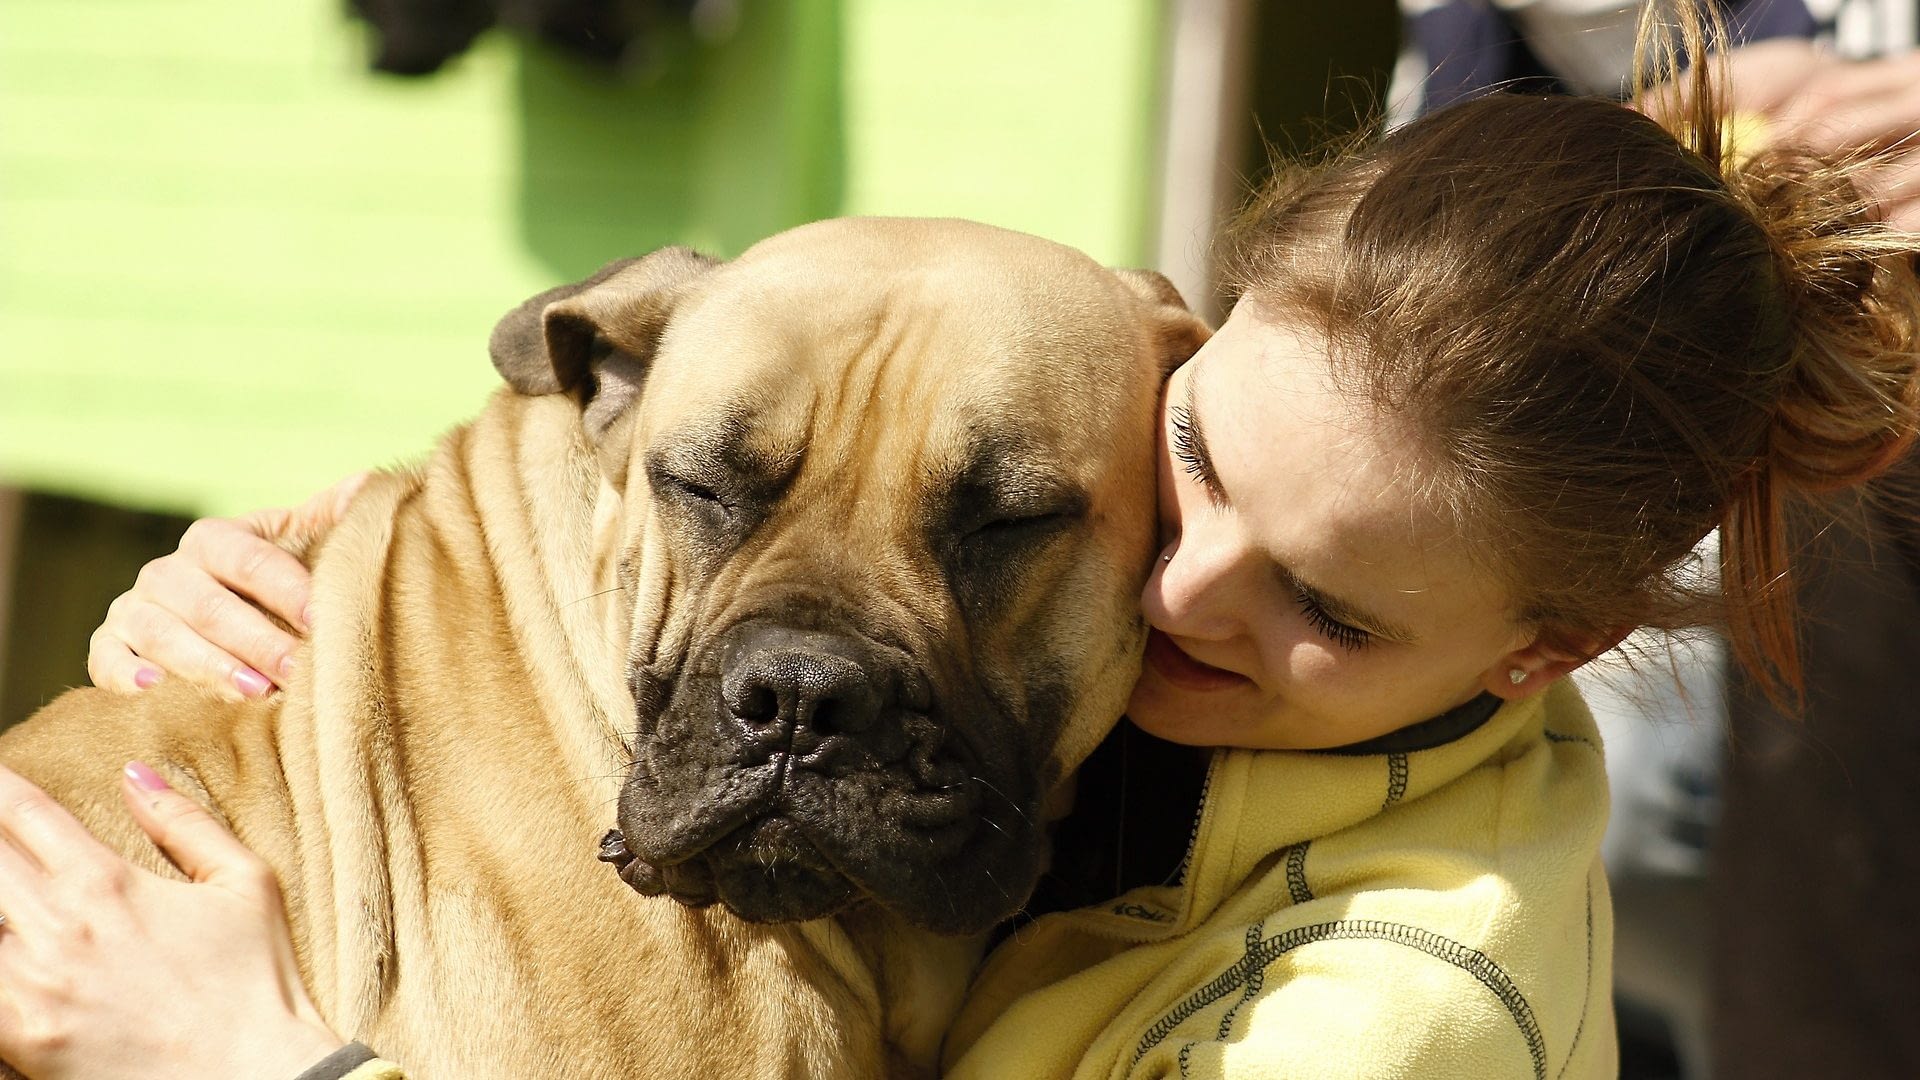 Image: Woman hugs large dog with a smile on his face like the dogs that are being trained to smell cancer